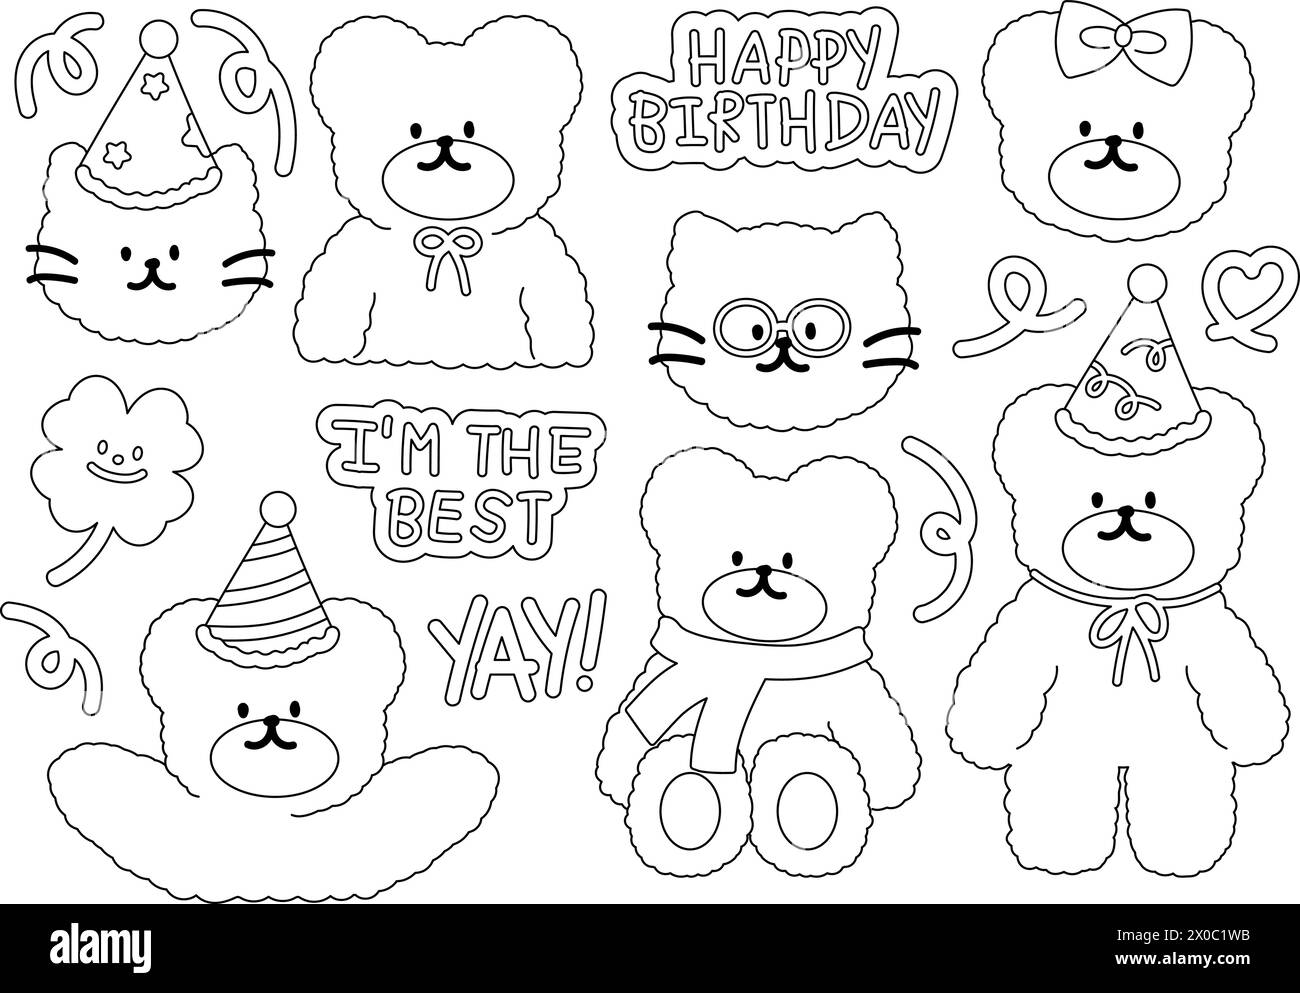 Outline illustration of birthday elements such as teddy bear, cat, party hat, HAPPY BIRTHDAY letters, clover leaf for stickers, tattoo, card, icons Stock Vector